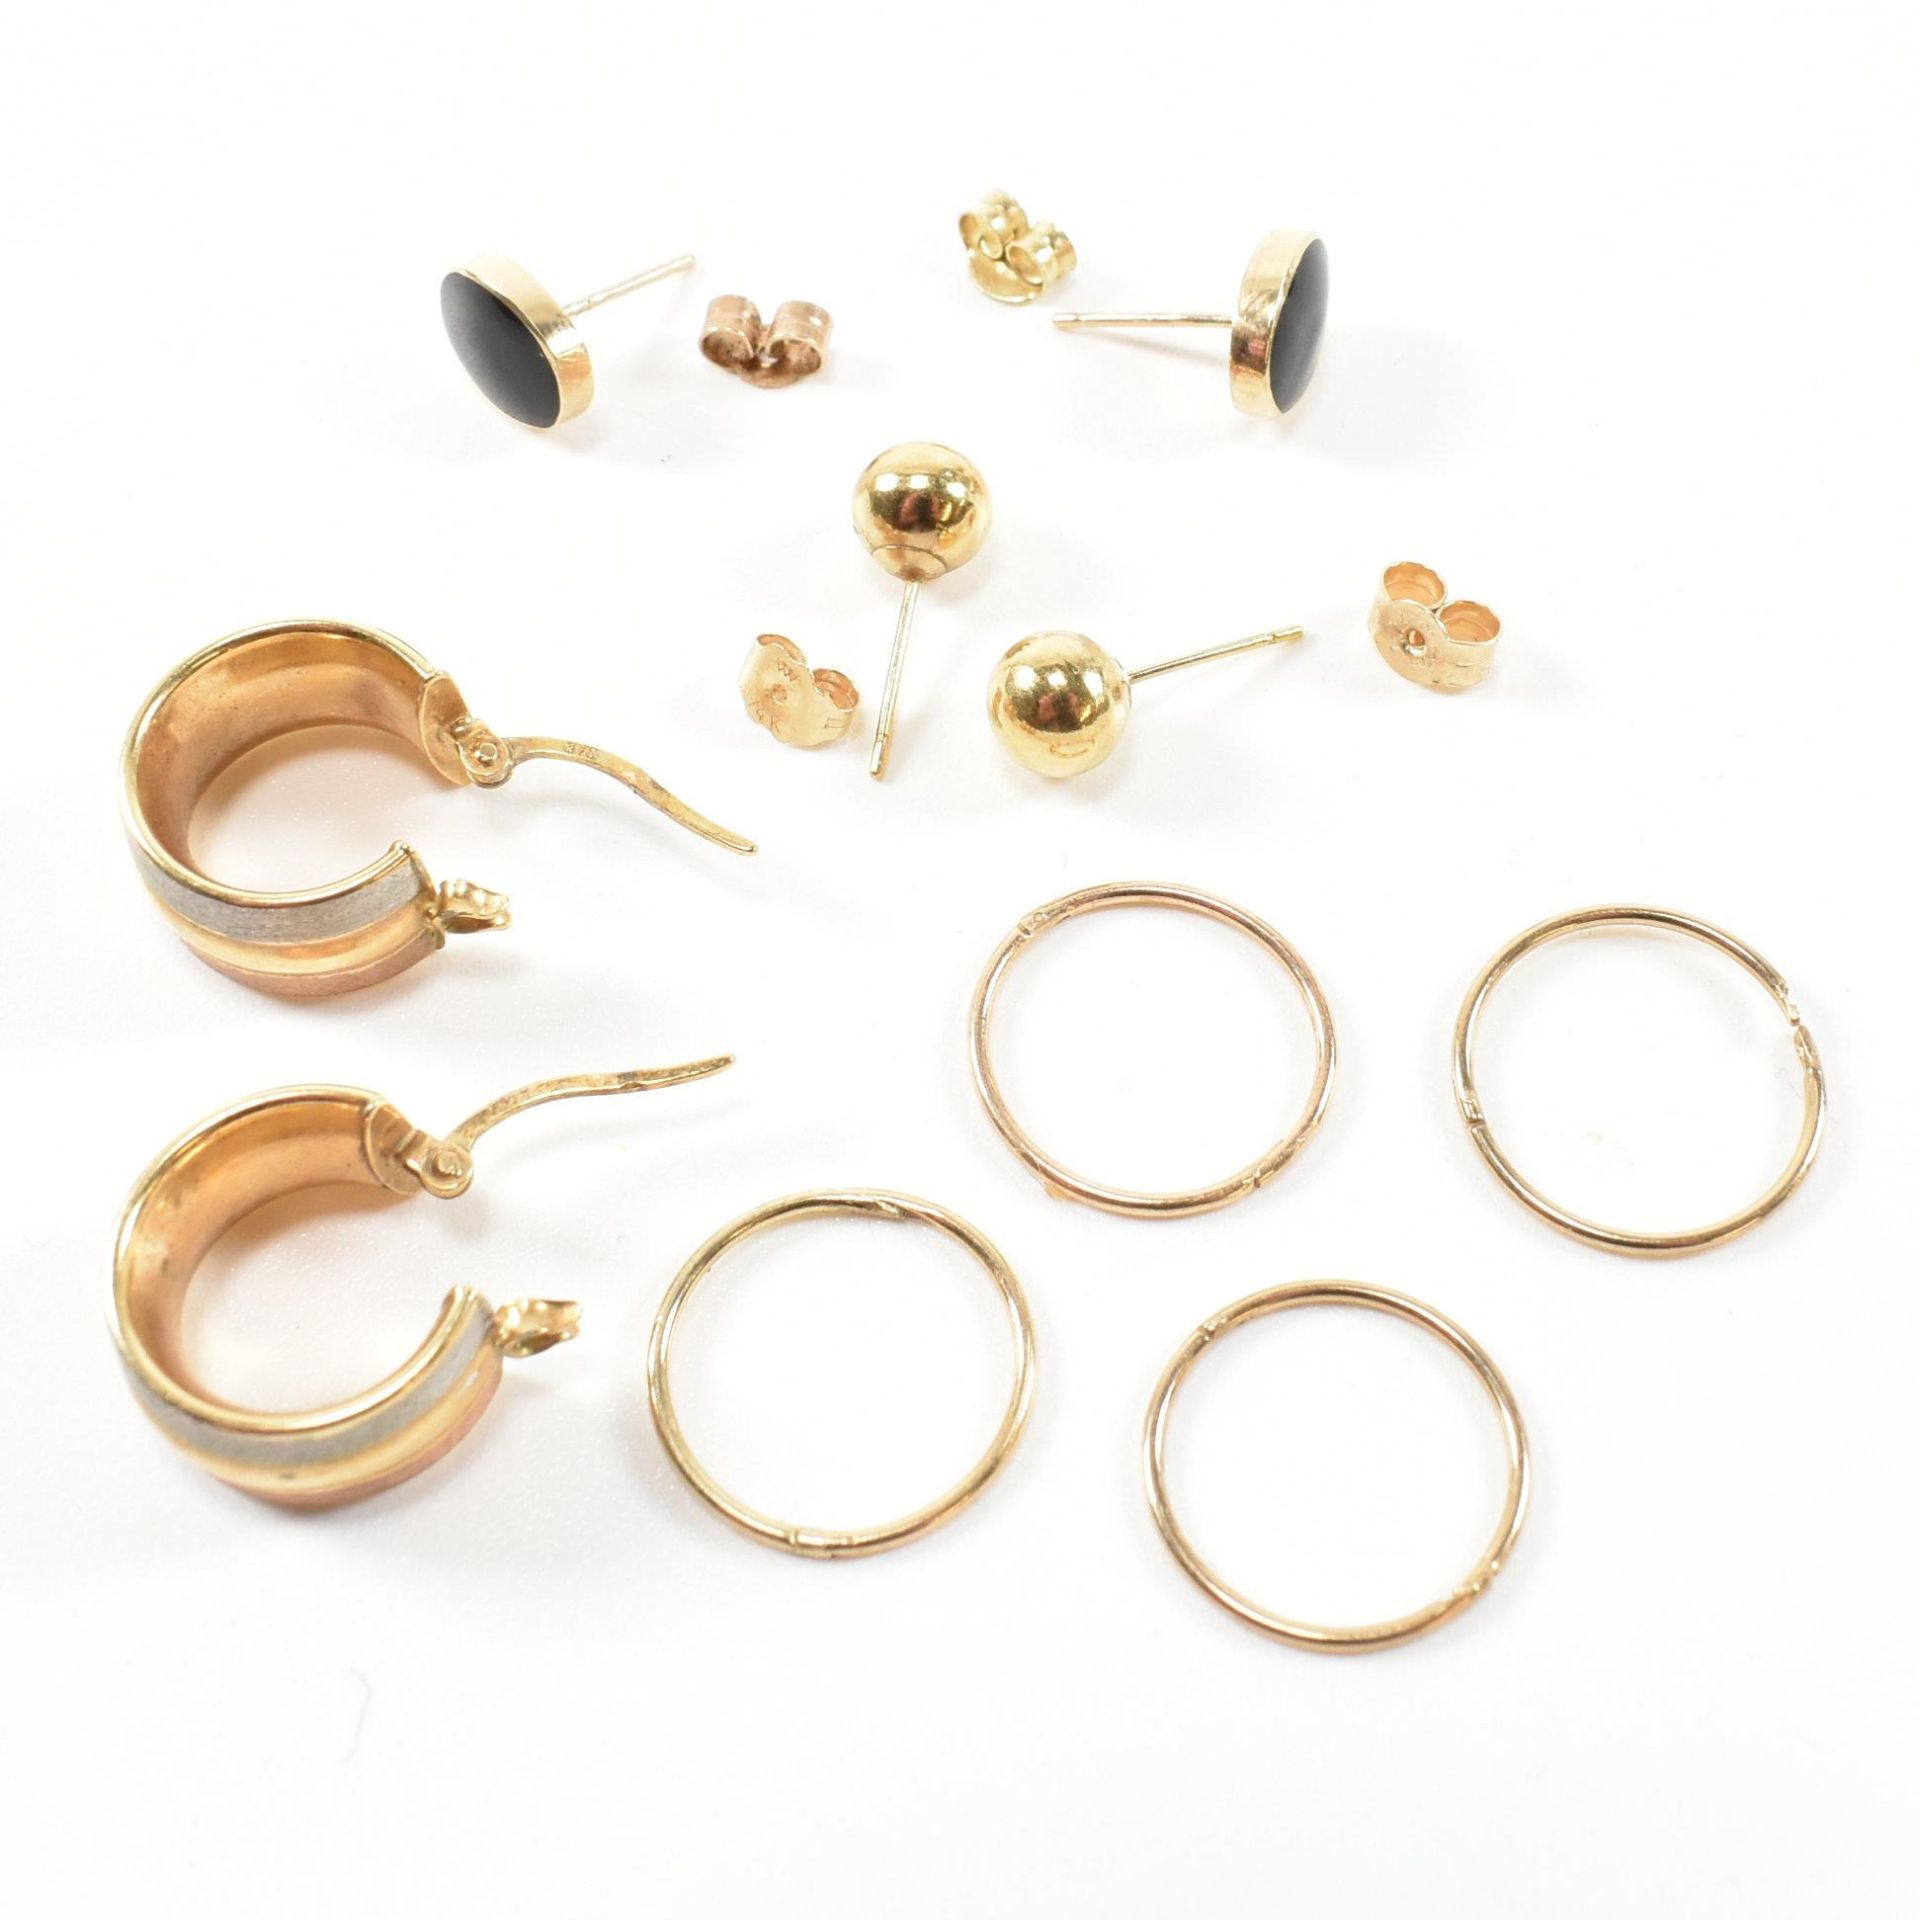 COLLECTION OF 9CT GOLD HOOP & STUD EARRINGS - Image 4 of 7